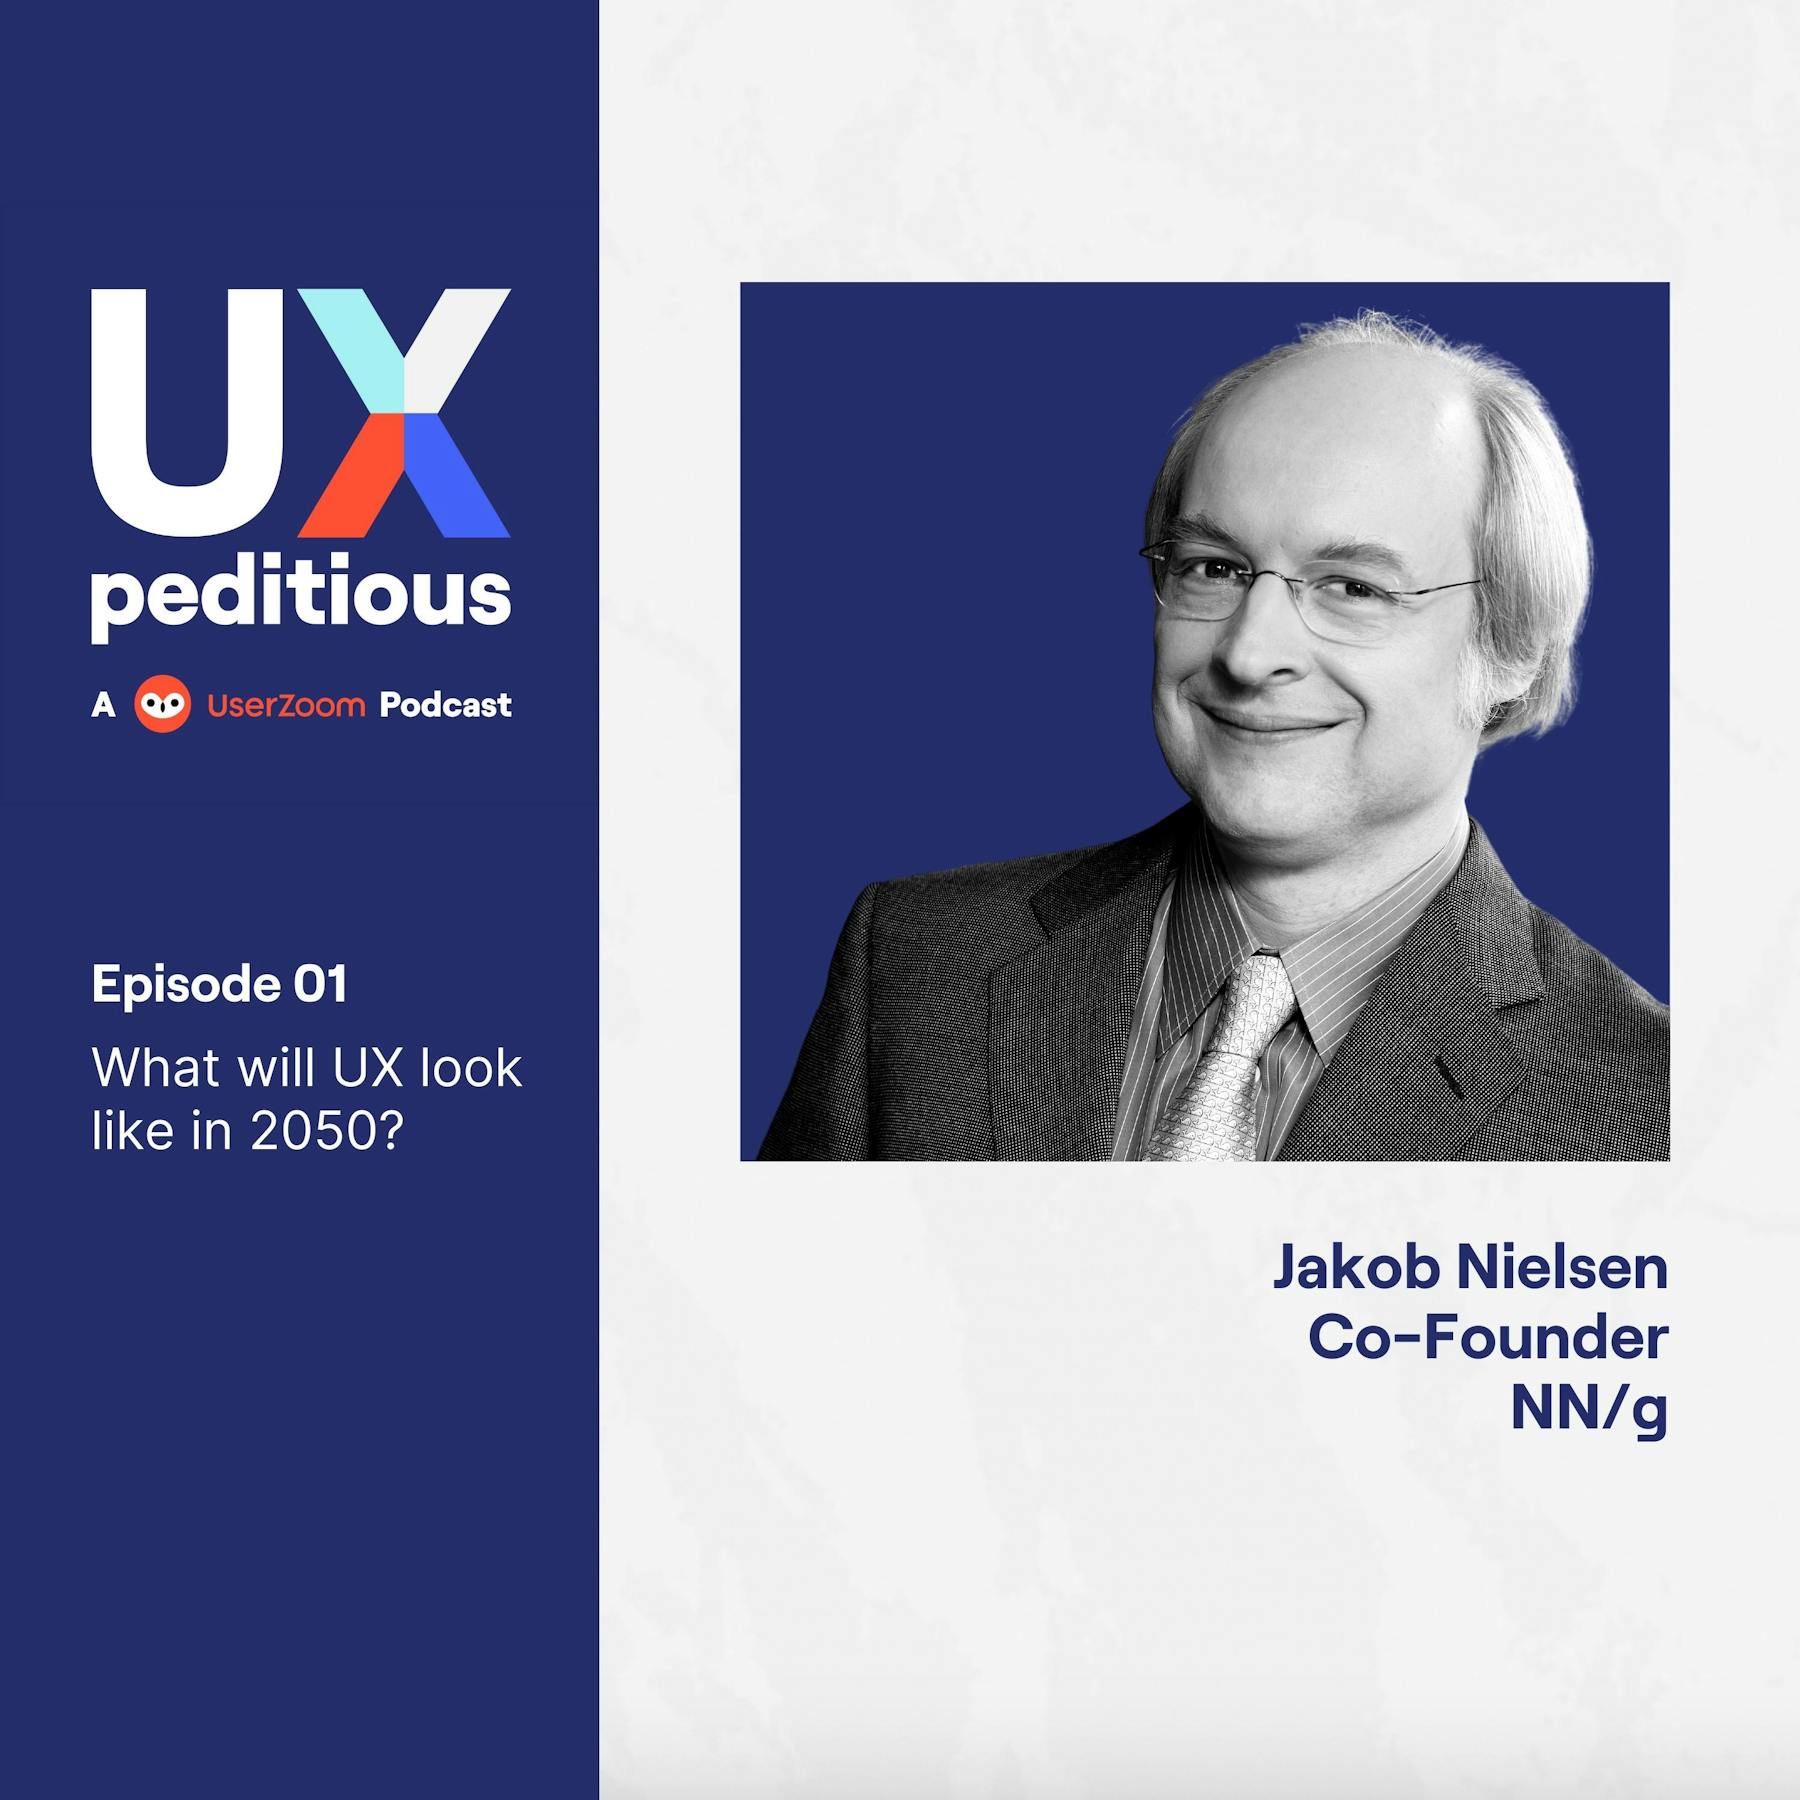 Jakob Nielsen on a podcast discussing what will UX look like in 2050